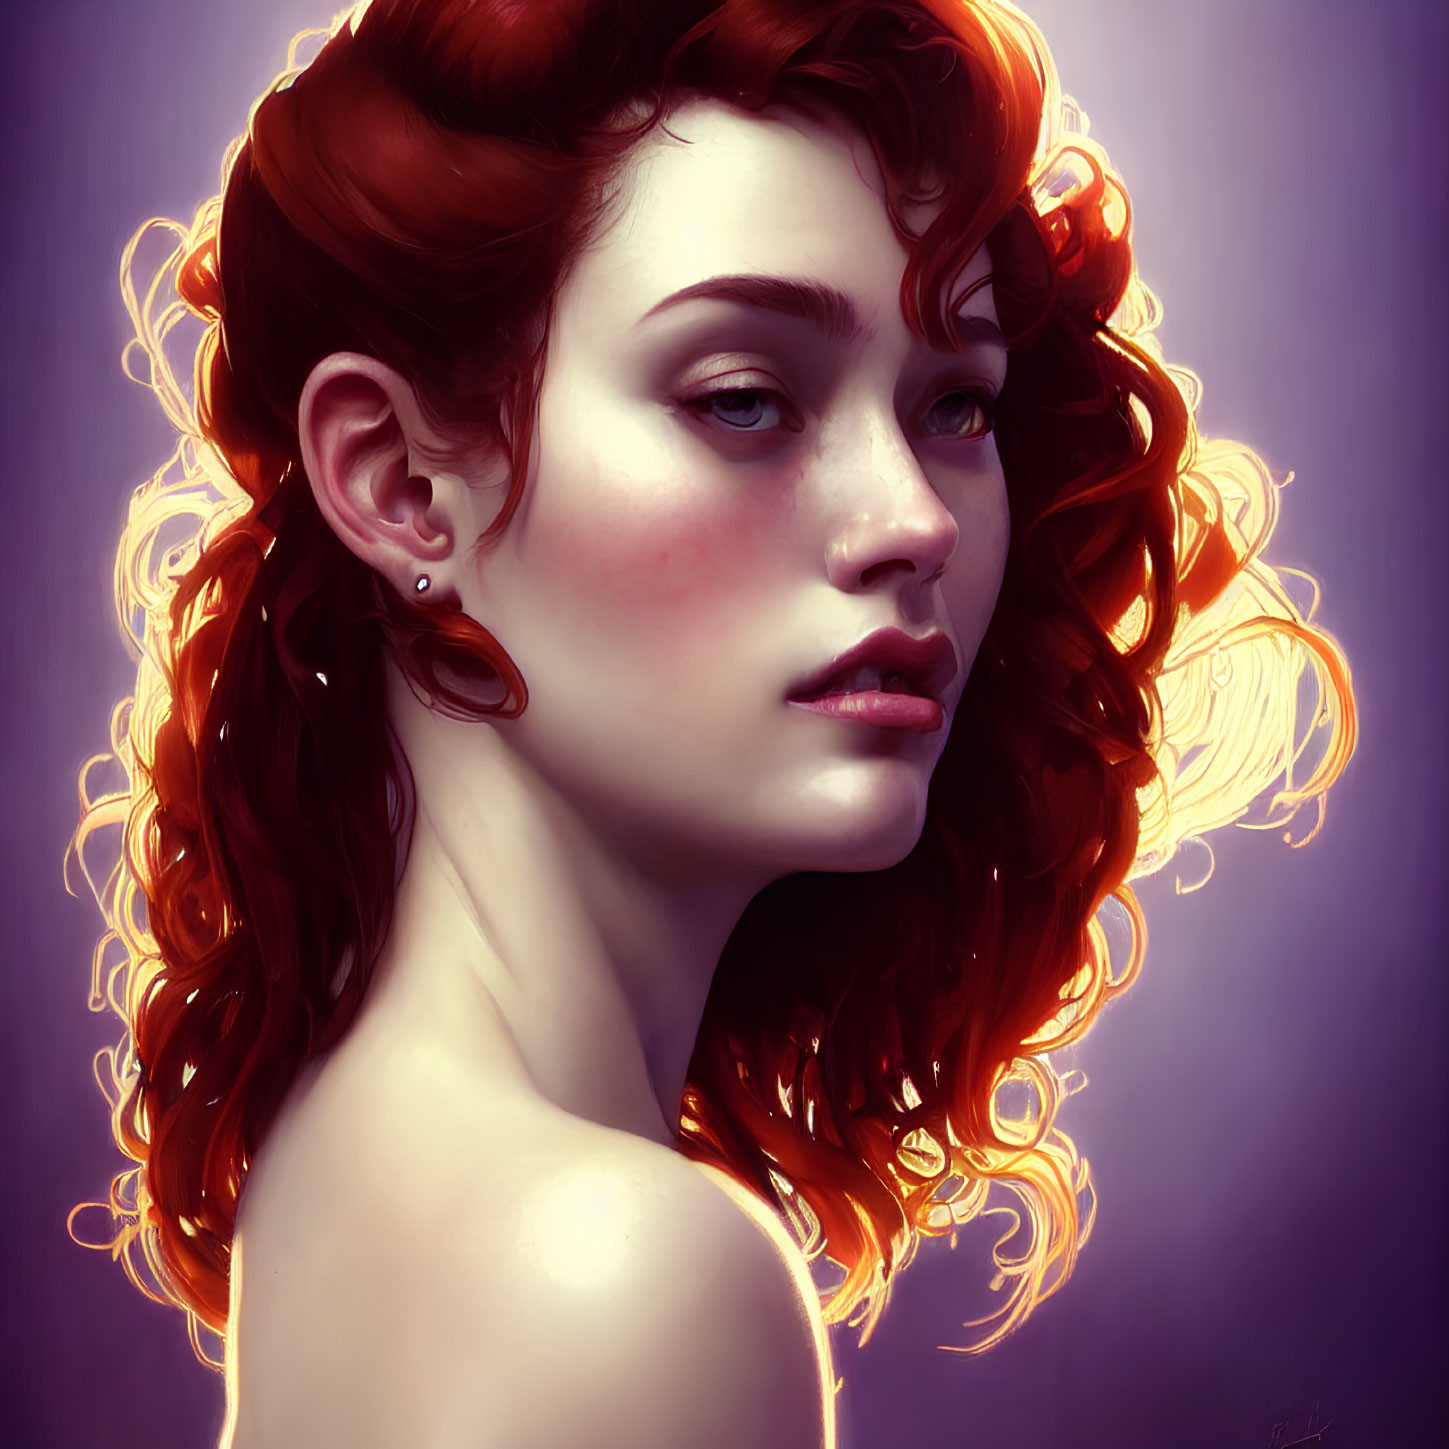 Curly Red-Haired Woman Portrait with Thoughtful Expression